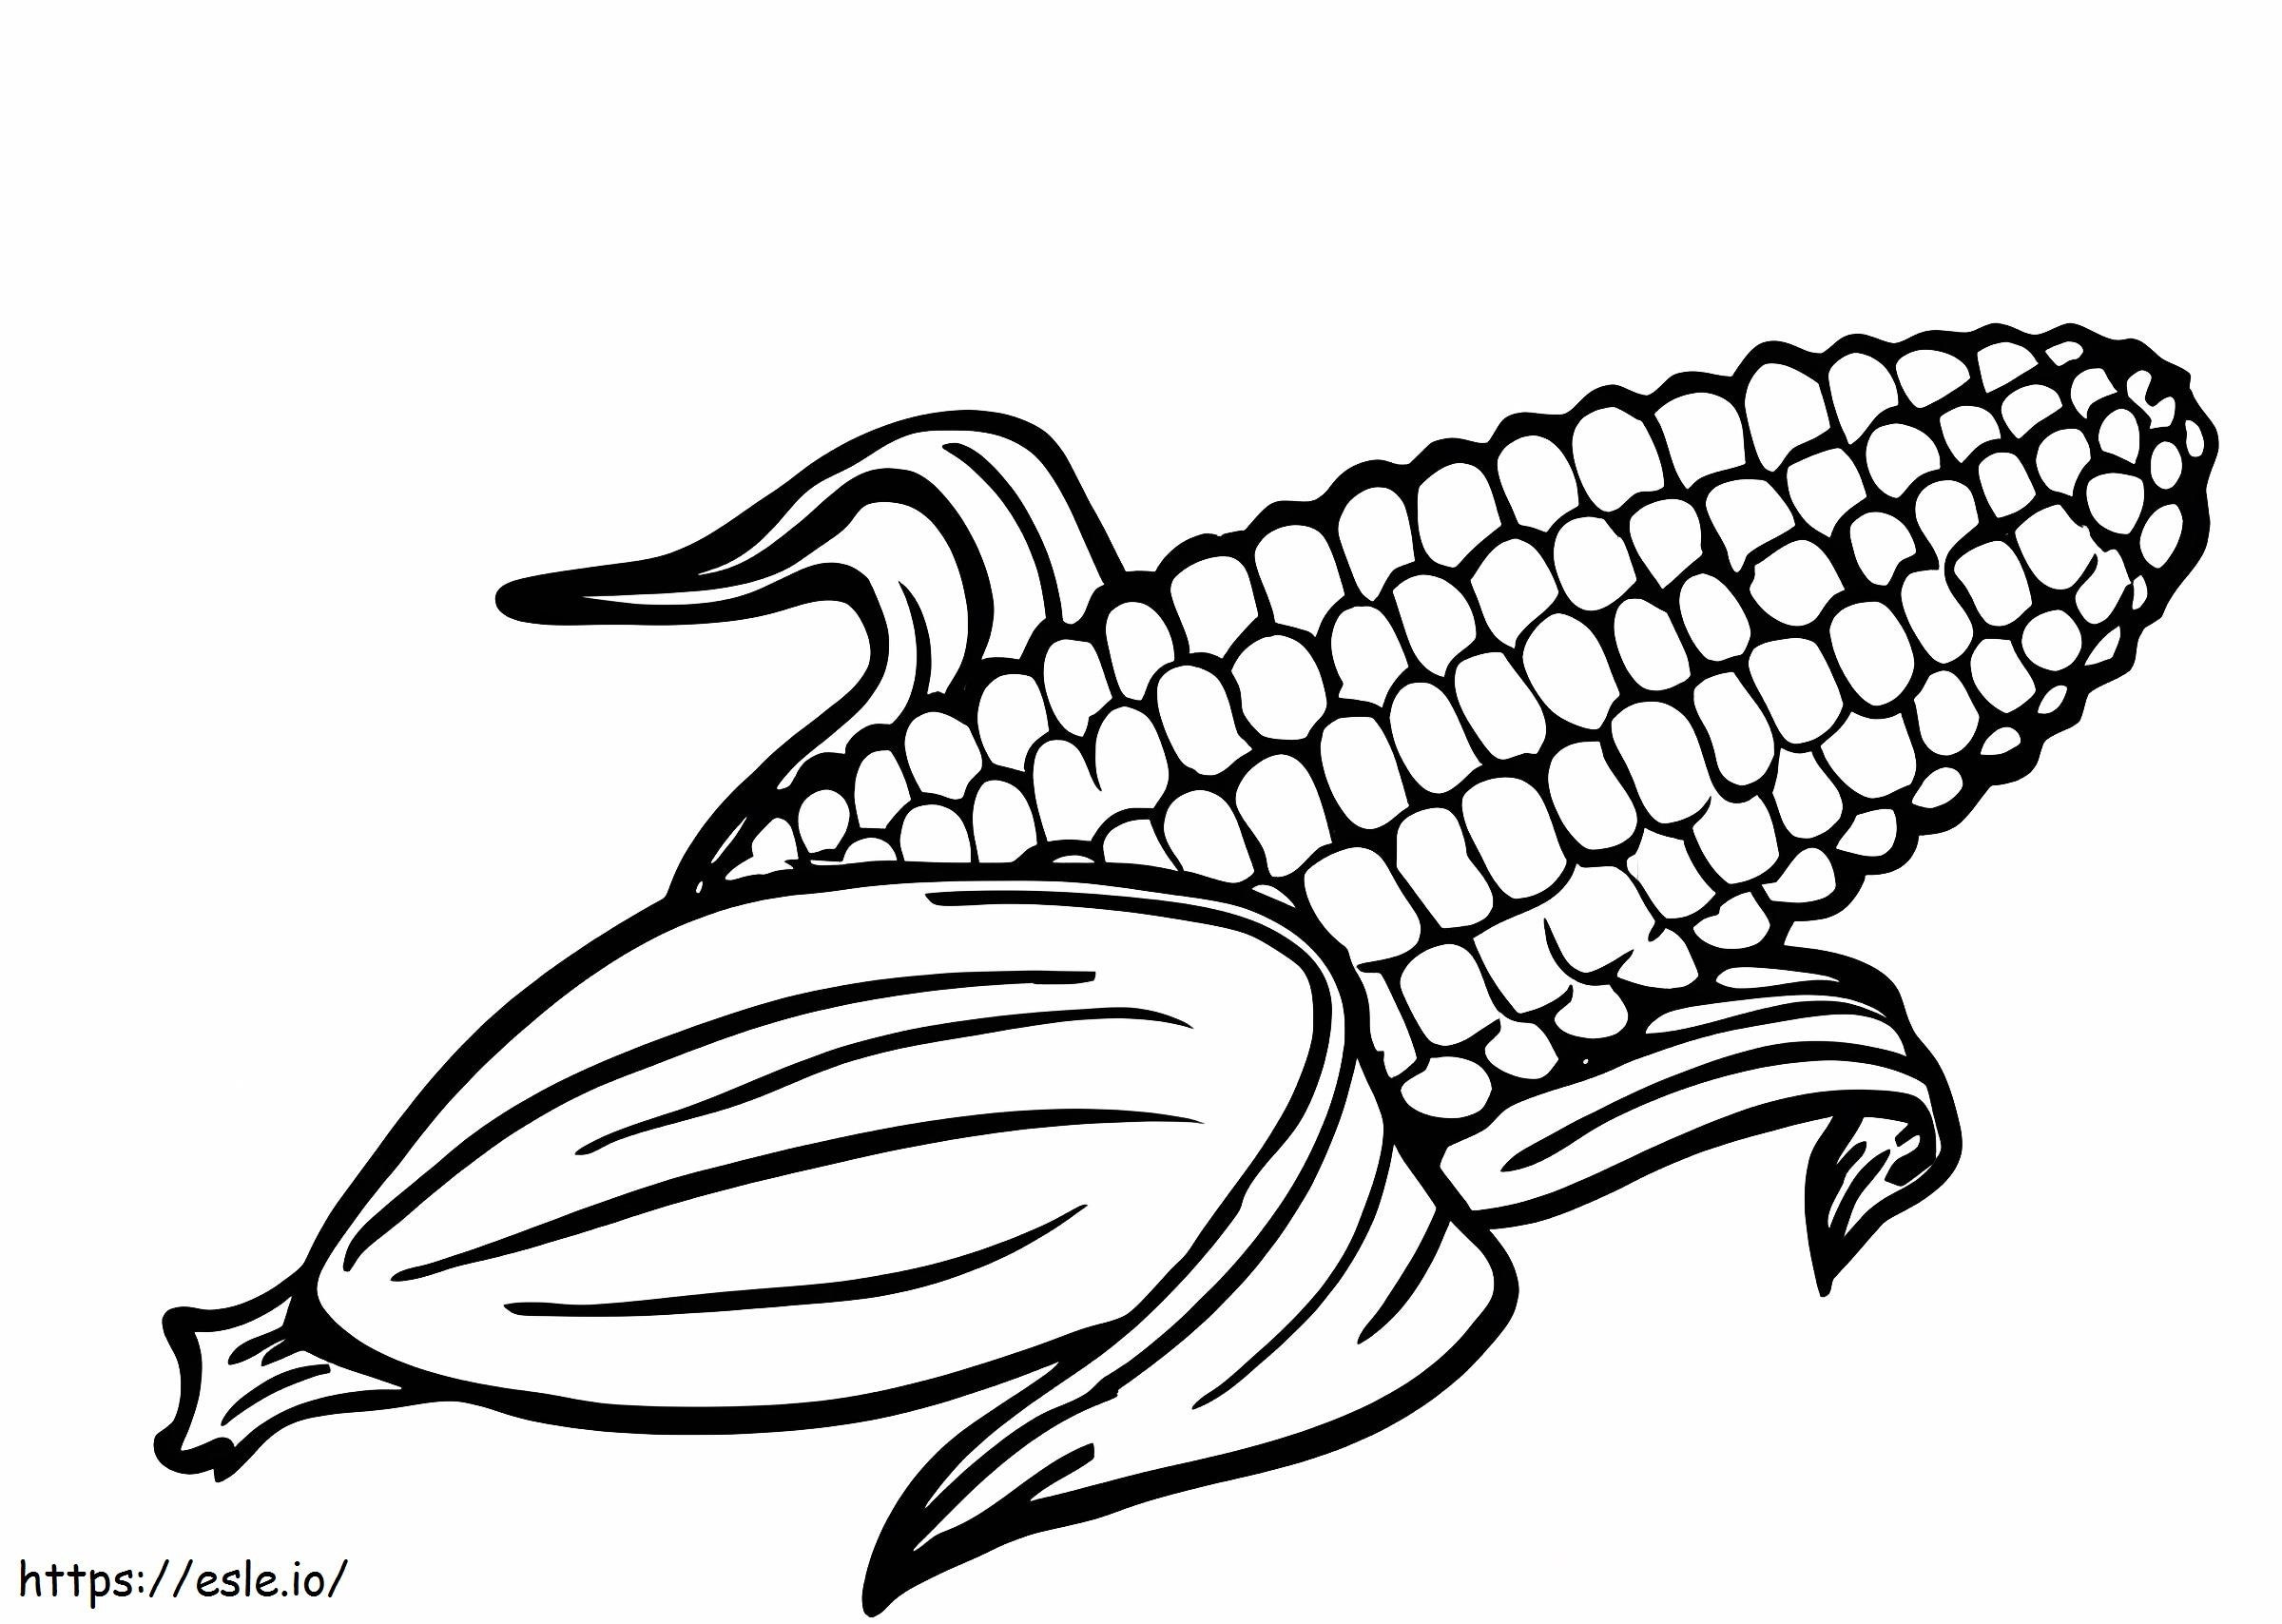 Corn On The Cob coloring page